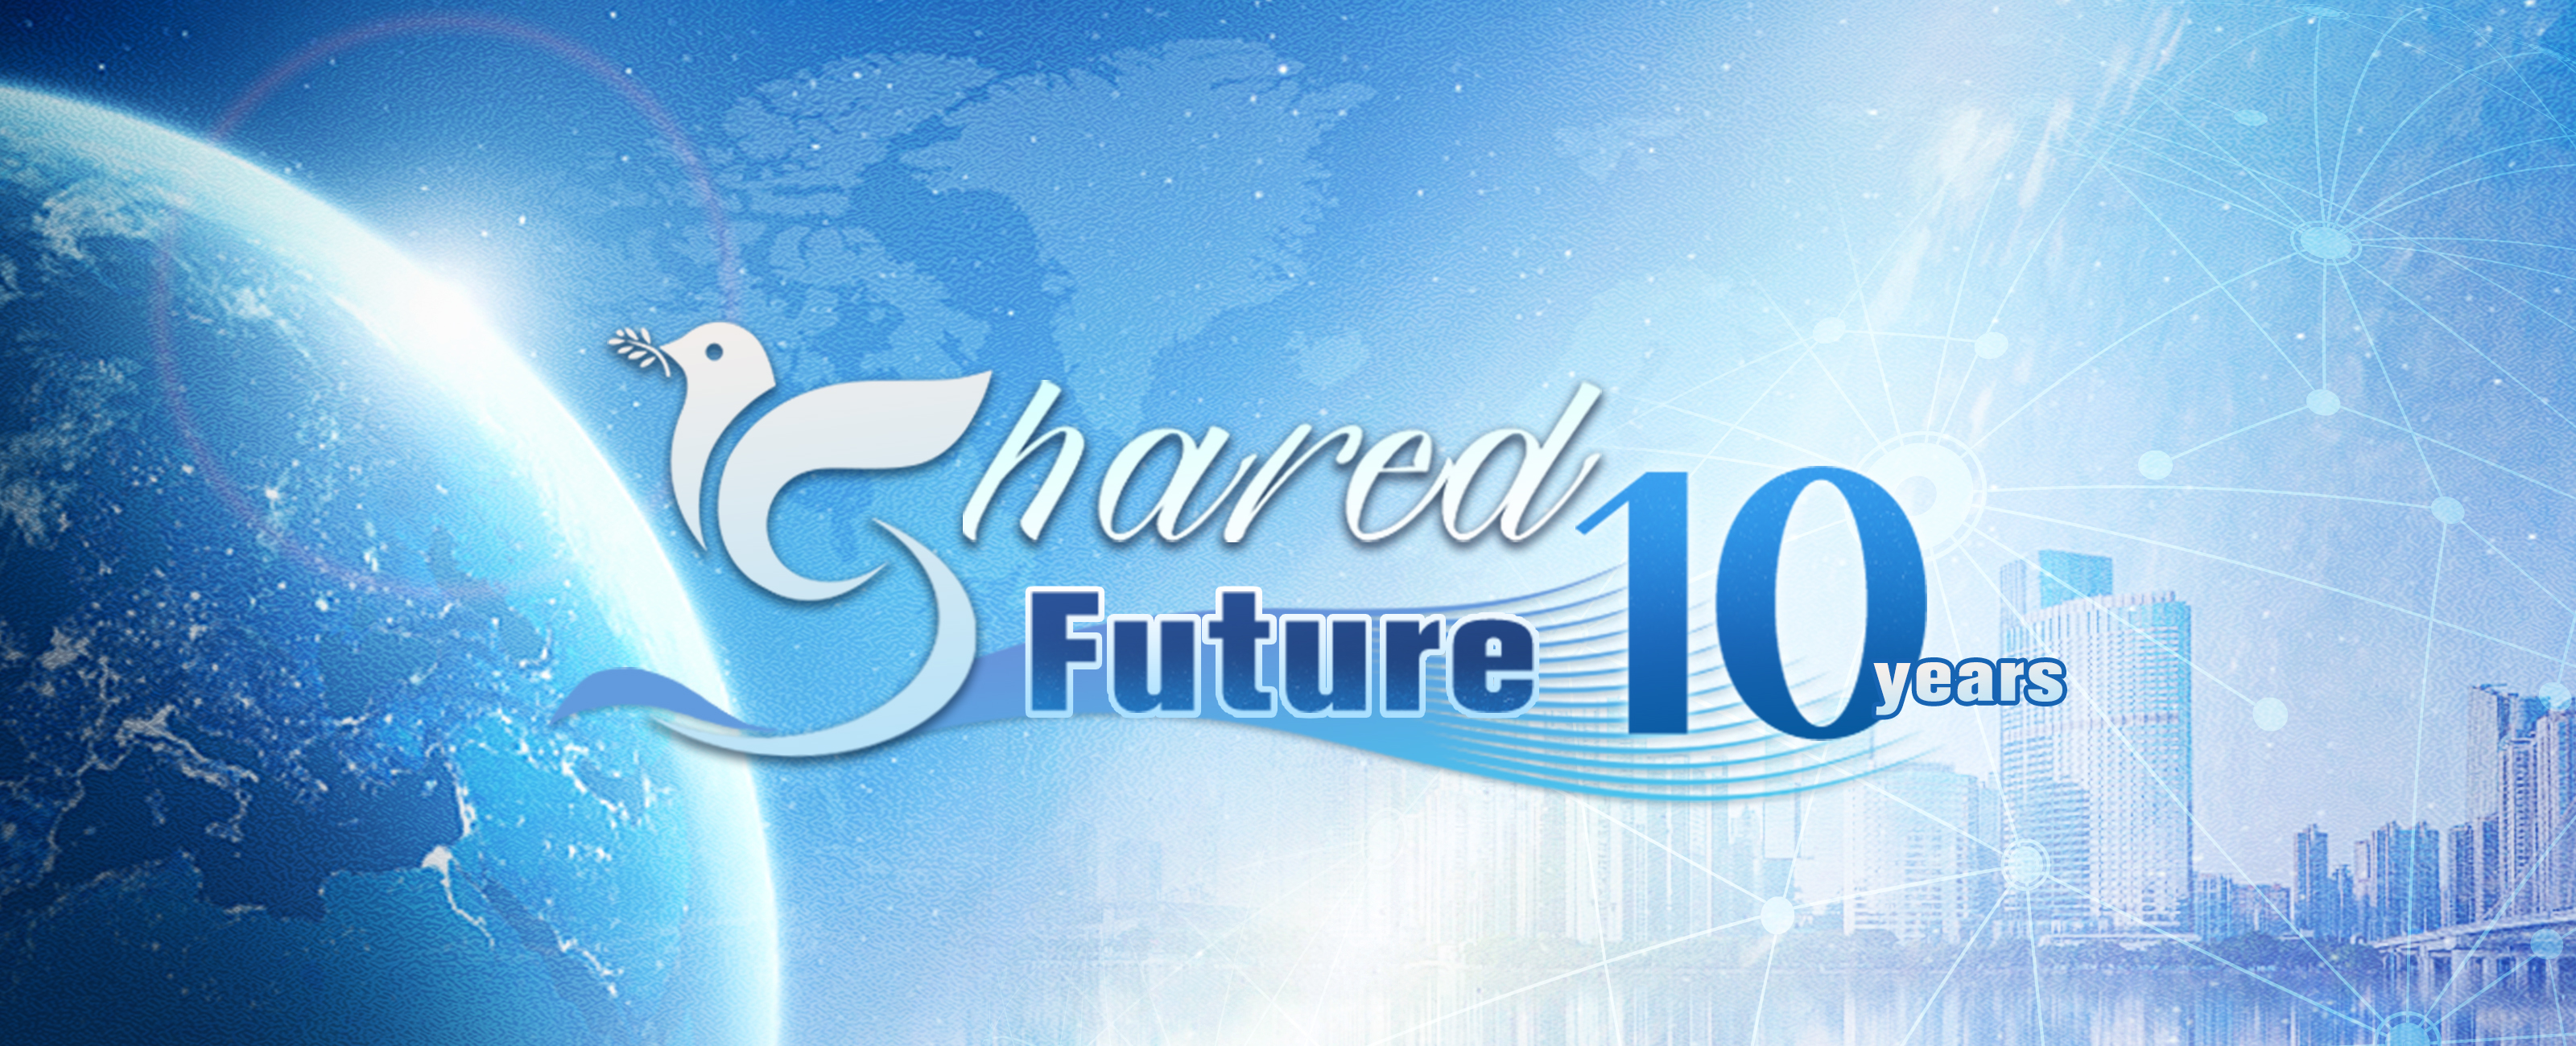 Shared Future 10 Years: To build our future together | CGTN